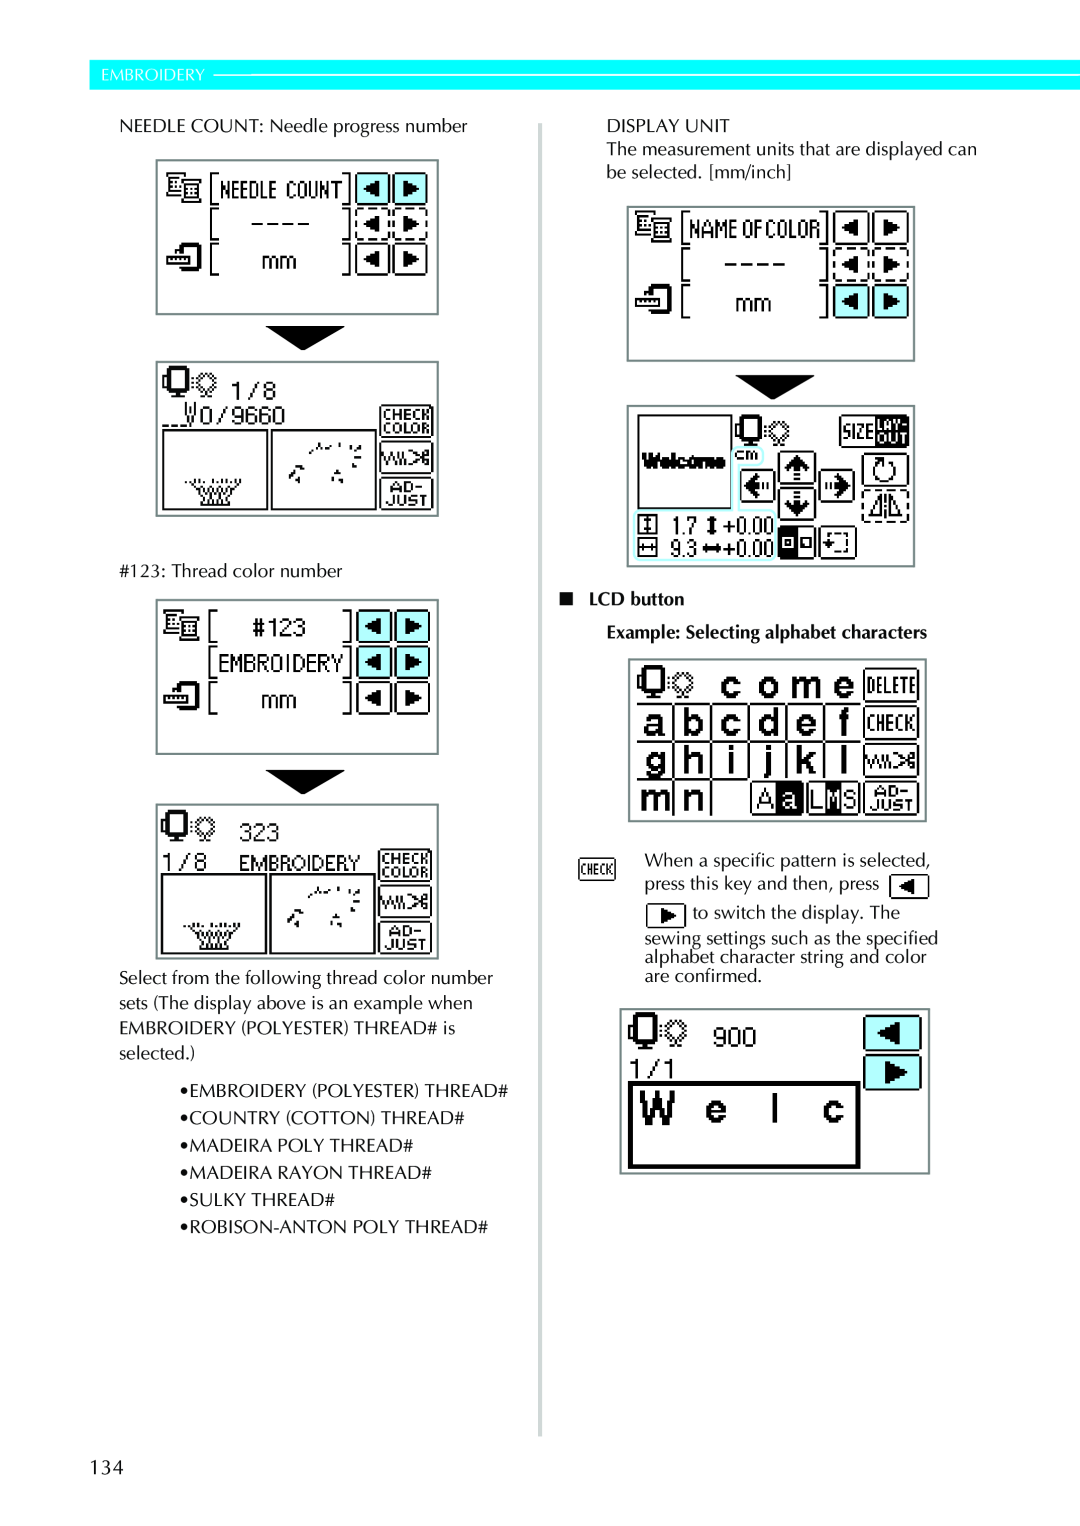 Brother 885-V33, 885-V31 operation manual Embroidery, LCD button Example Selecting alphabet characters 